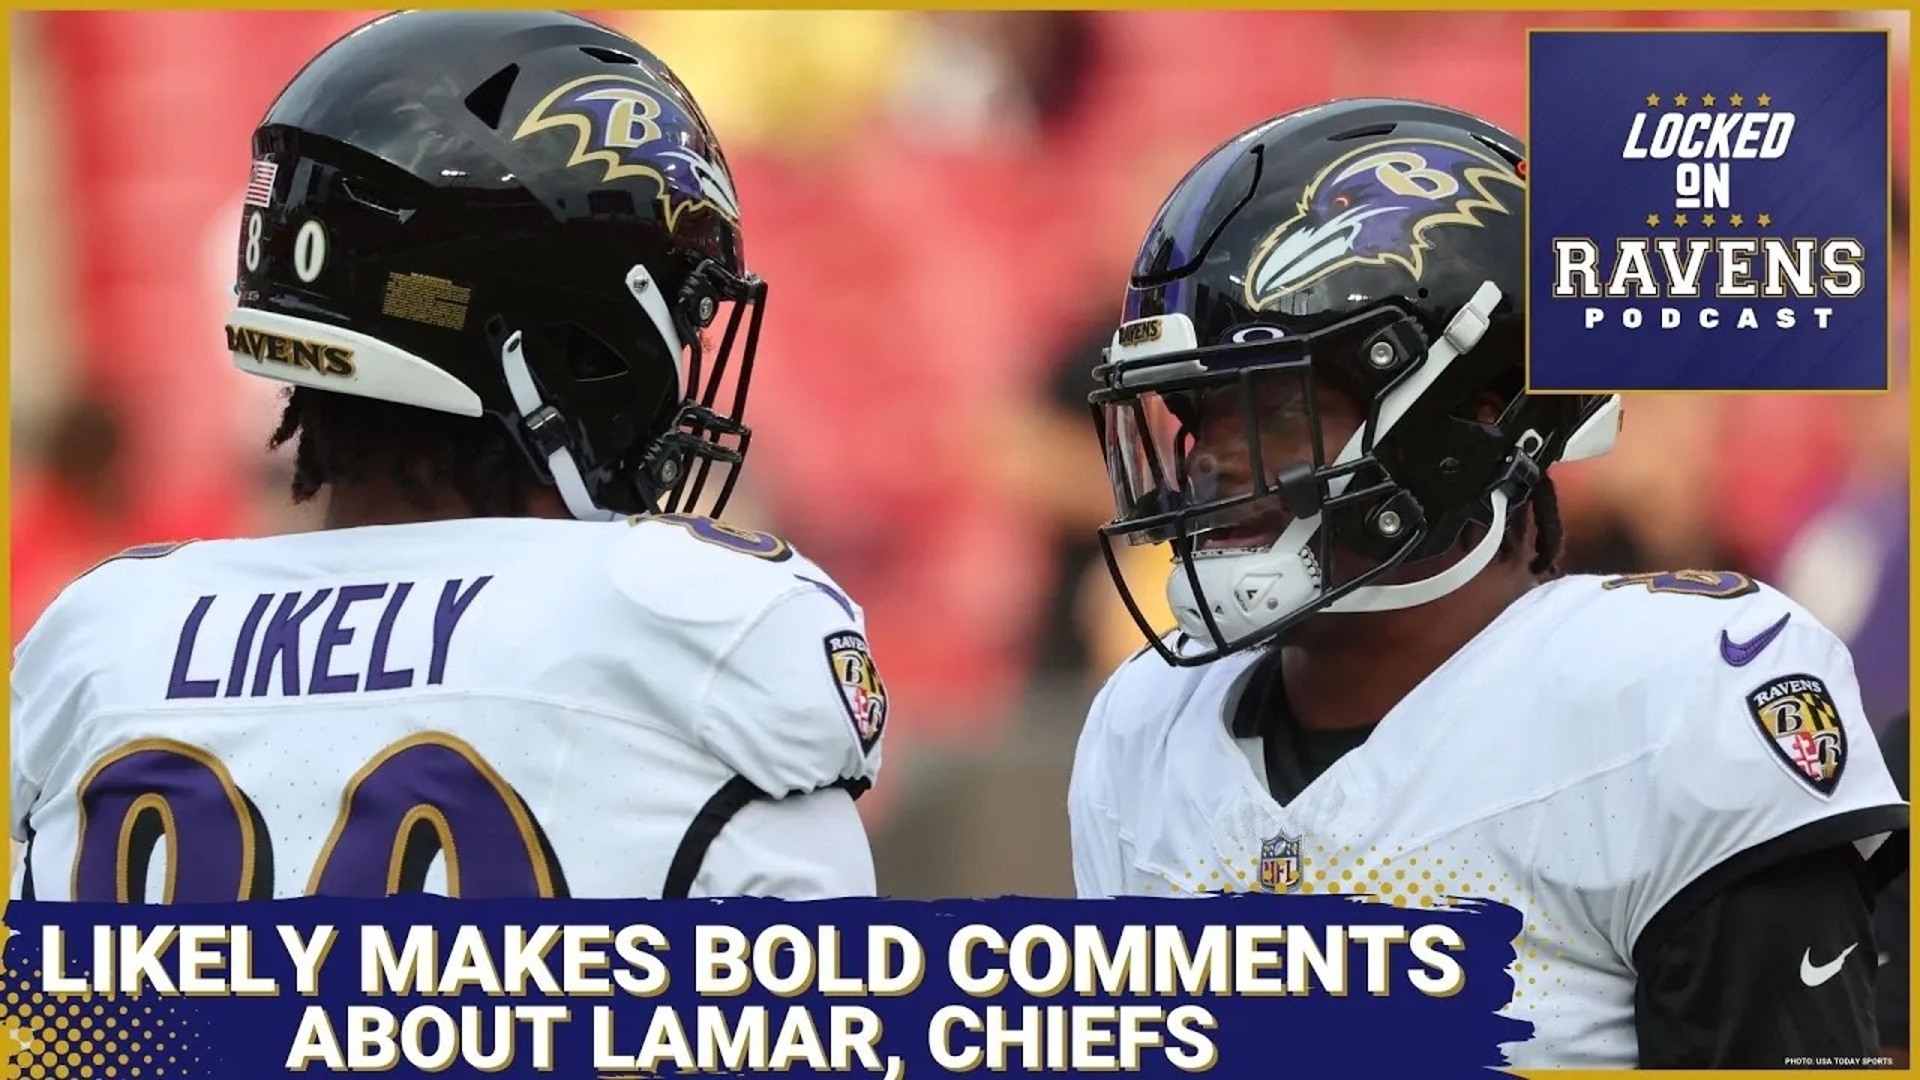 We look at the bold comments made by Baltimore Ravens tight end Isaiah Likely with Rocco DiSangro, discussing what was said and more.